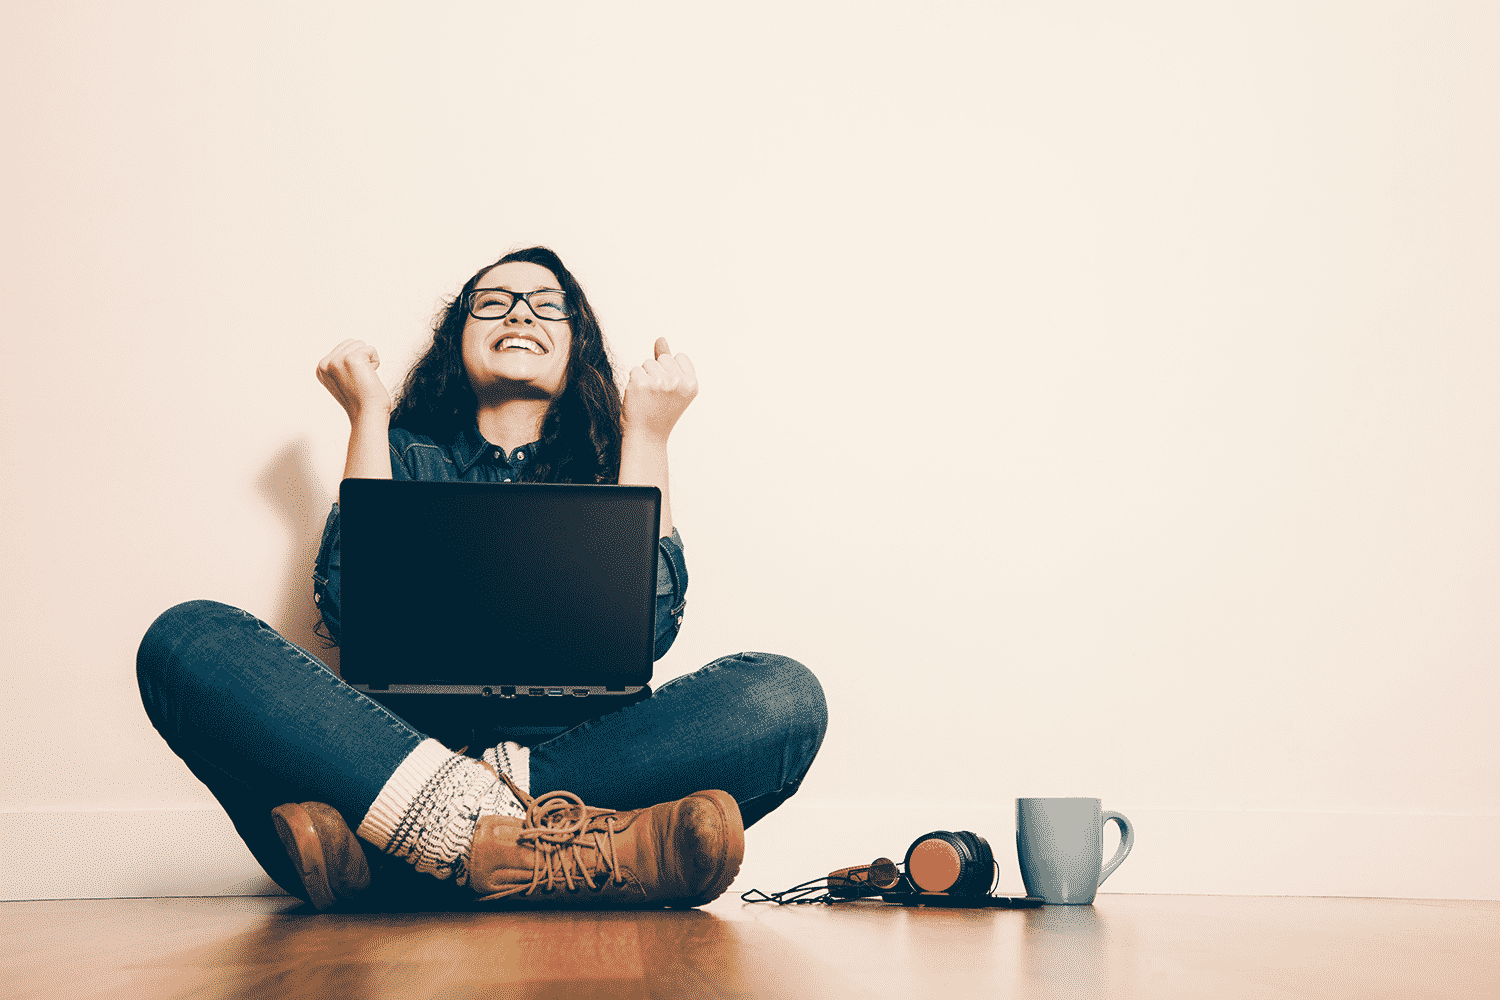 Young woman with laptop smiling with headphones and coffee next to her.